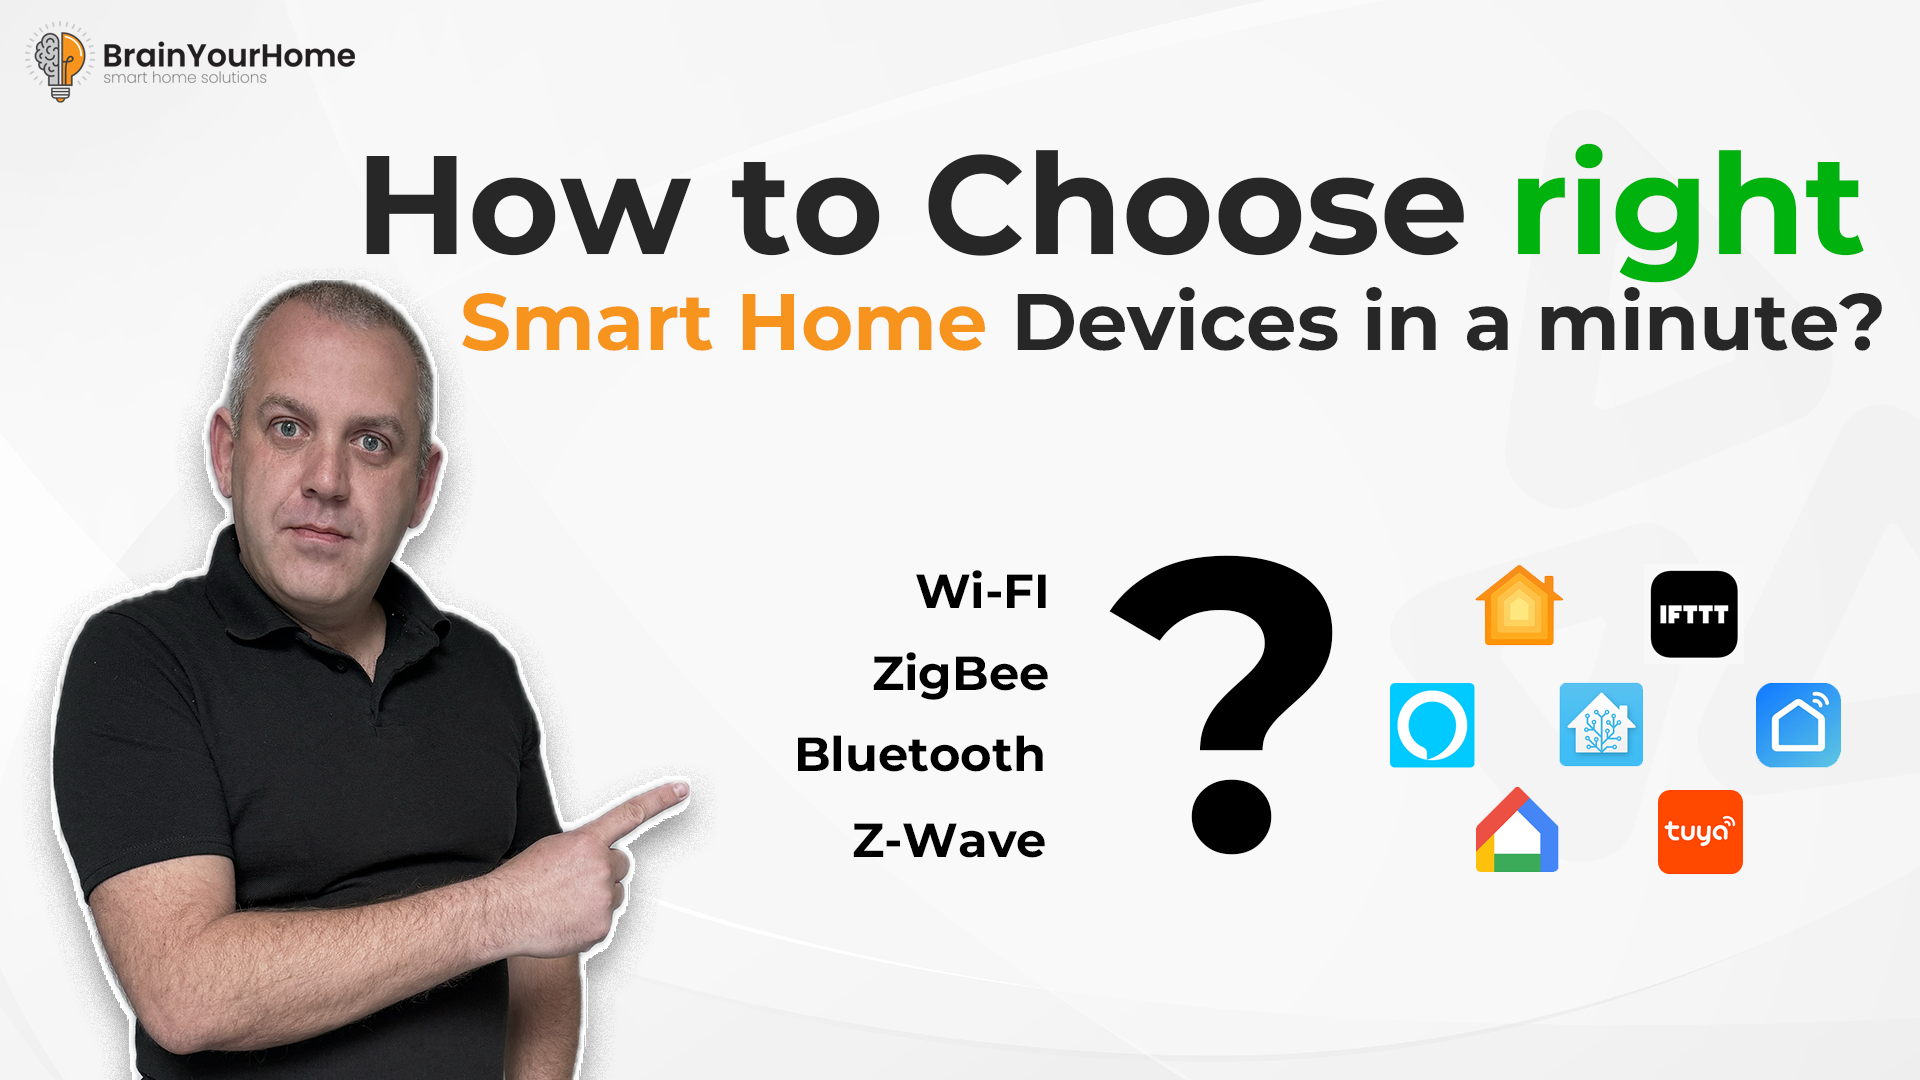 How to choose the right Smart Home Devices in a minute?